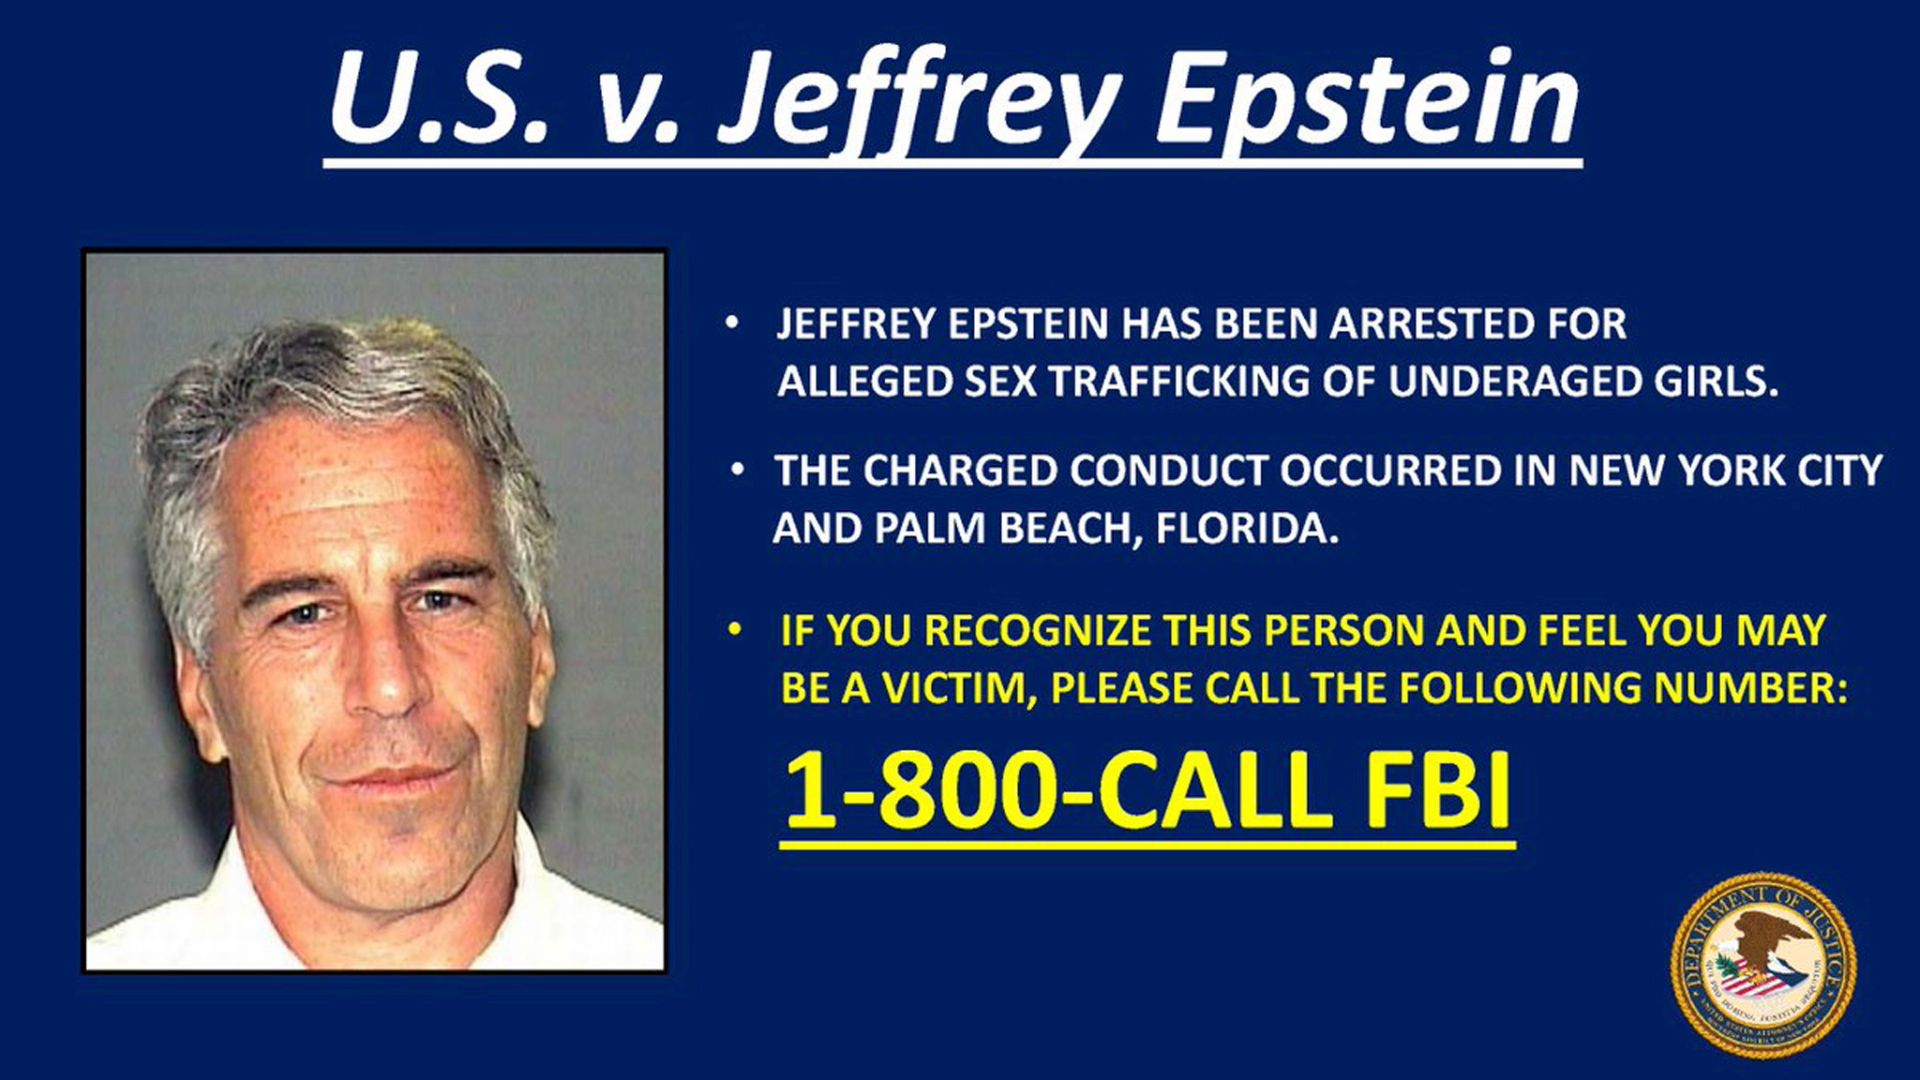 epa07704663 An undated handout photo made available by the US Attorney Southern District of New York showing Jeffrey Epstein. The US Attorney Southern District of New York state that they are appealing for members of the public who if they believe they are a victim of Jeffrey Epstein, or have information about the conduct alleged in the Indictment unsealed 08 July 2019, please call the FBI. US financier Jeffrey Epstein who was arrested on 08 July 2019 on alleged sex trafficking and conspiracy charges, has been formally charged with two sex trafficking counts.  EPA/US ATTORNEY SDNY / HANDOUT  HANDOUT EDITORIAL USE ONLY/NO SALES